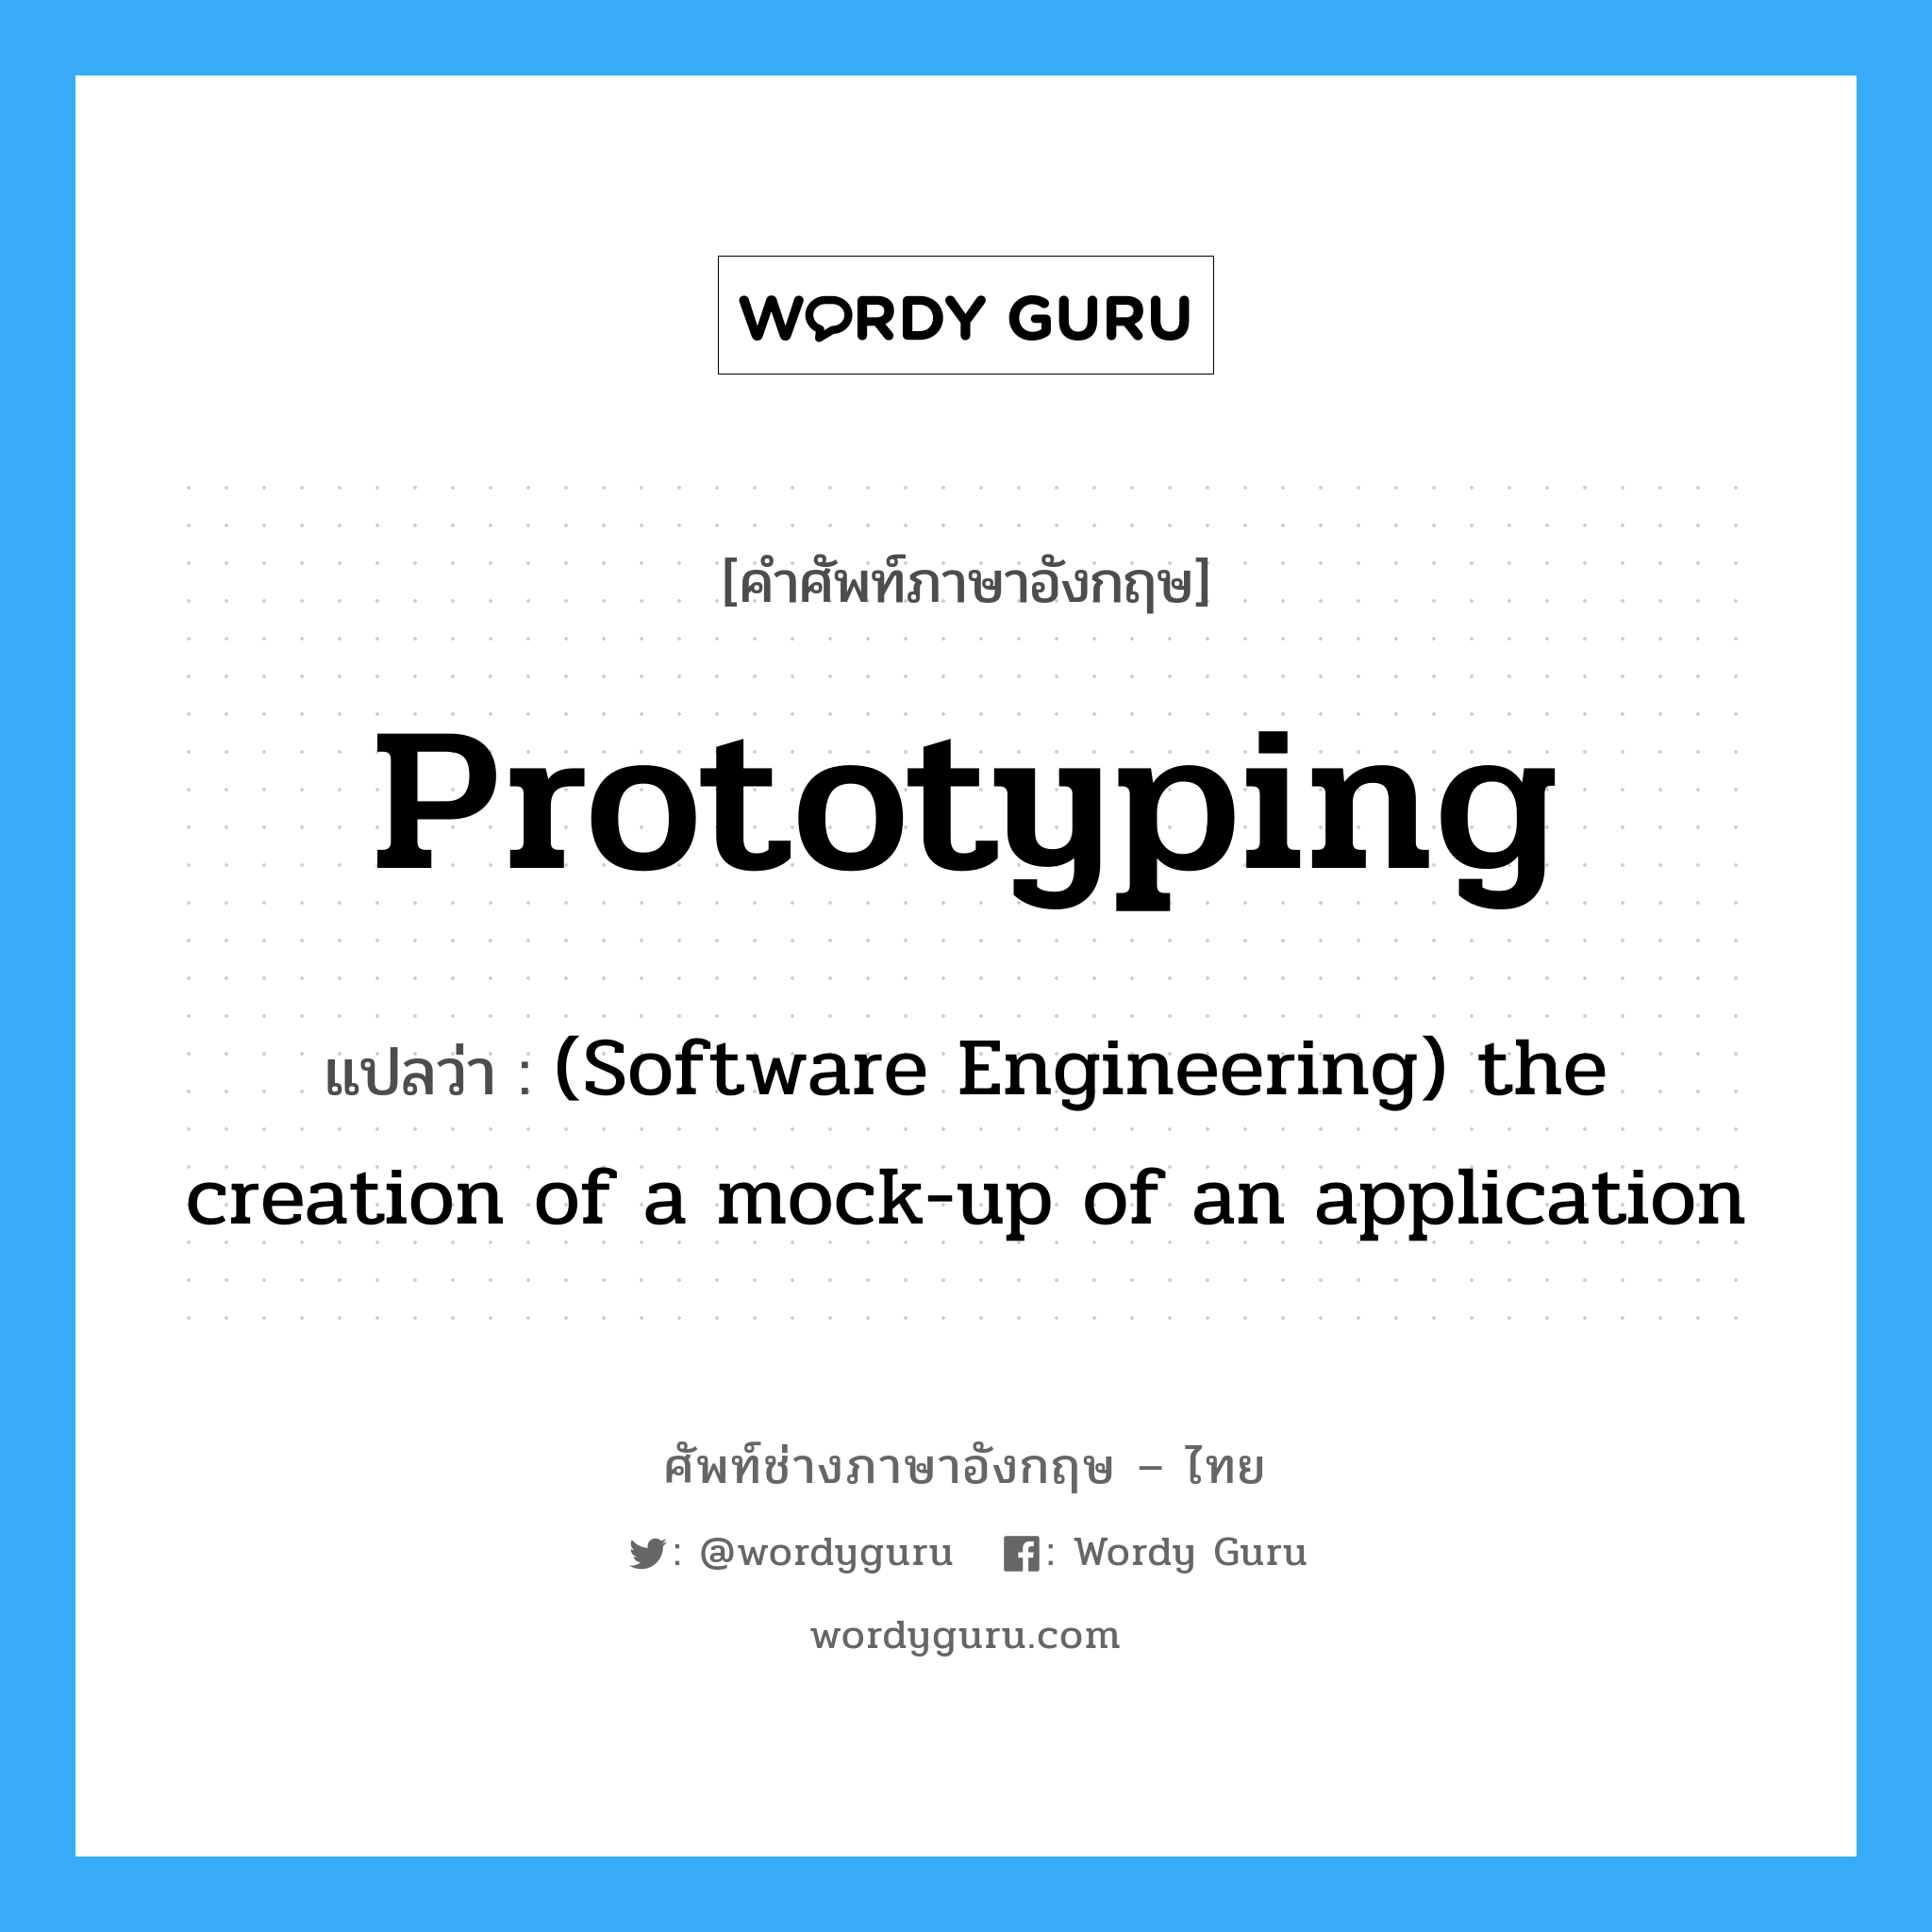 (Software Engineering) the creation of a mock-up of an application ภาษาอังกฤษ?, คำศัพท์ช่างภาษาอังกฤษ - ไทย (Software Engineering) the creation of a mock-up of an application คำศัพท์ภาษาอังกฤษ (Software Engineering) the creation of a mock-up of an application แปลว่า Prototyping